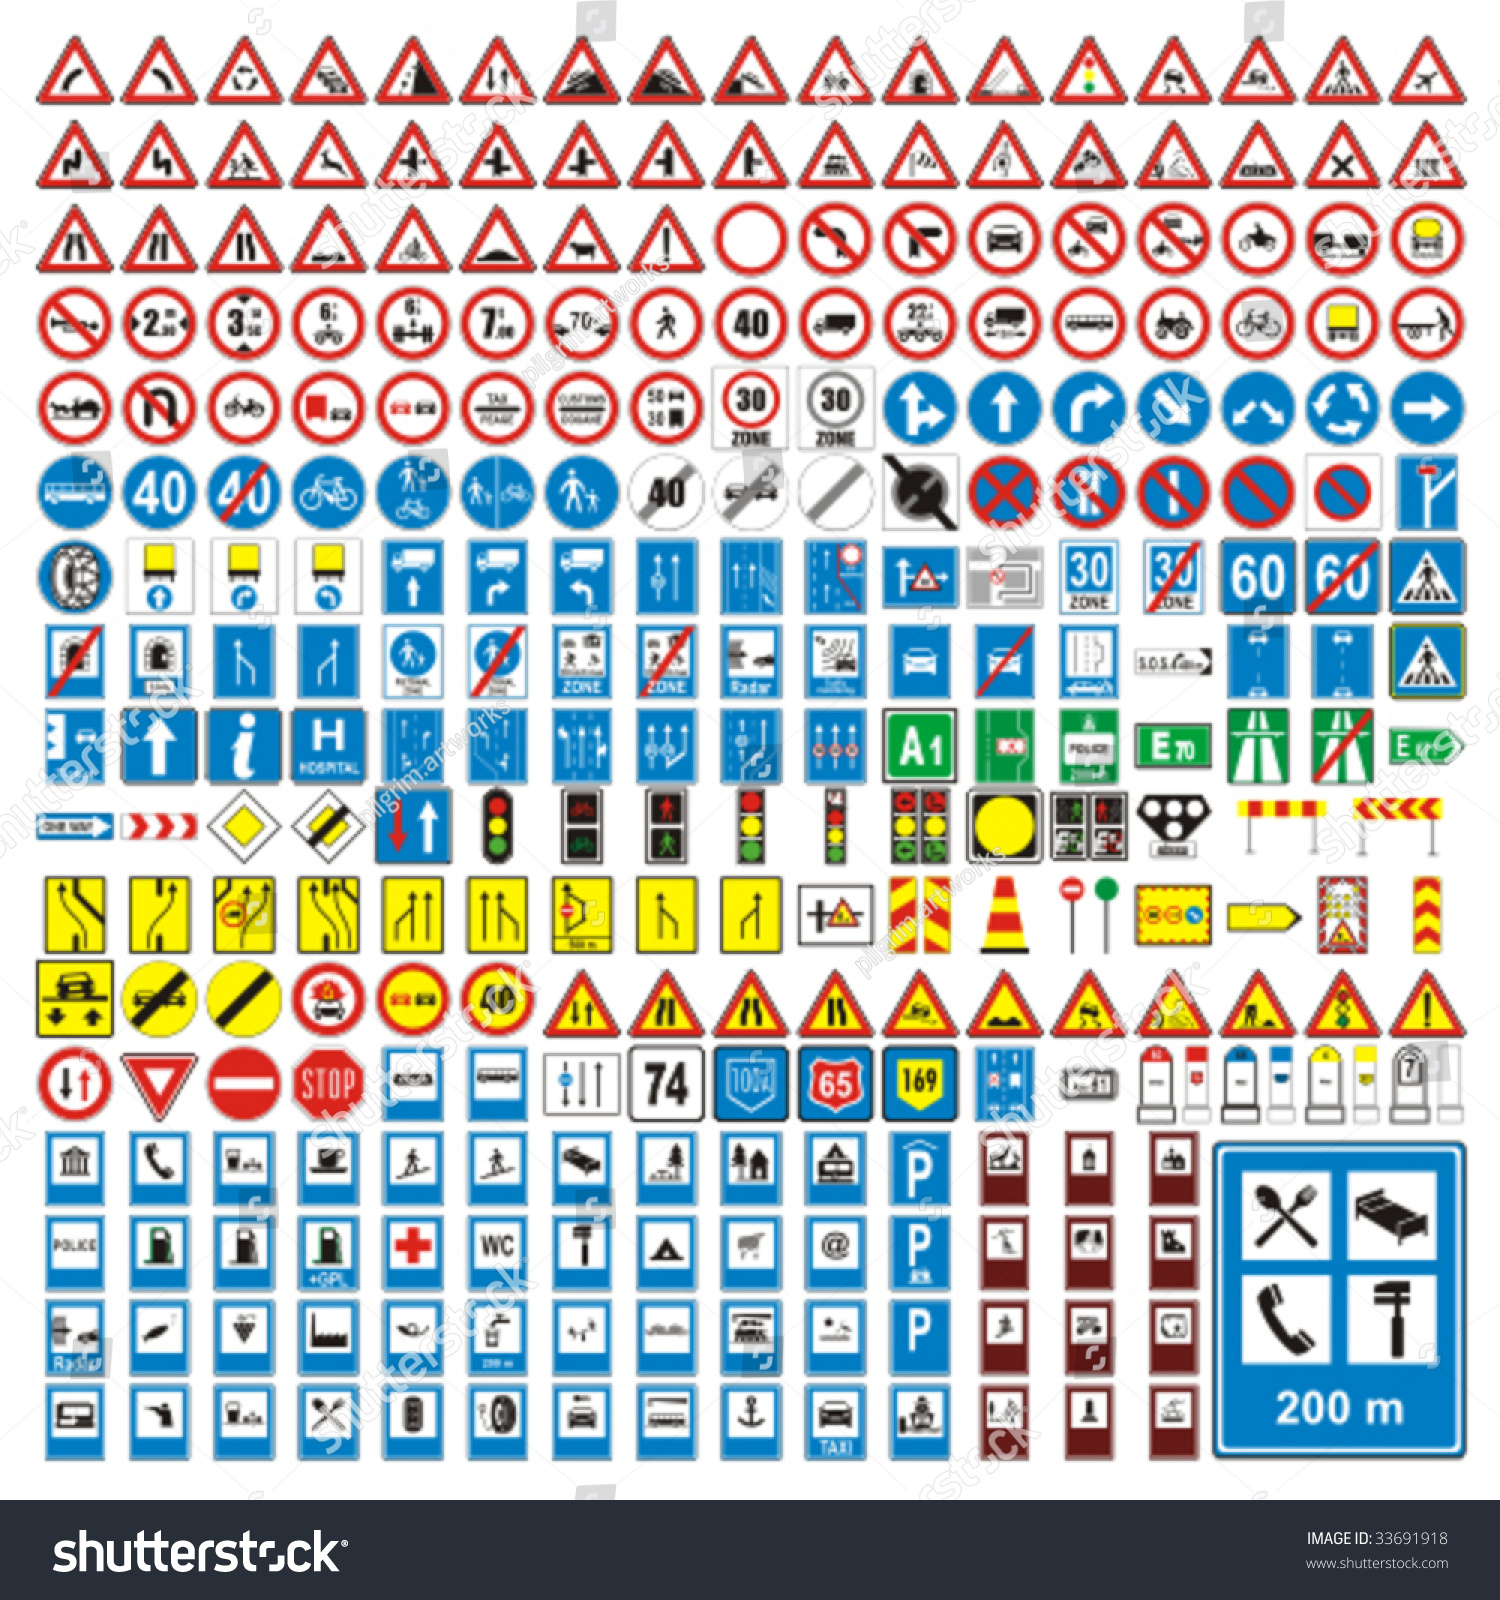 three hundred fully editable vector european traffic signs with details ready to use #33691918